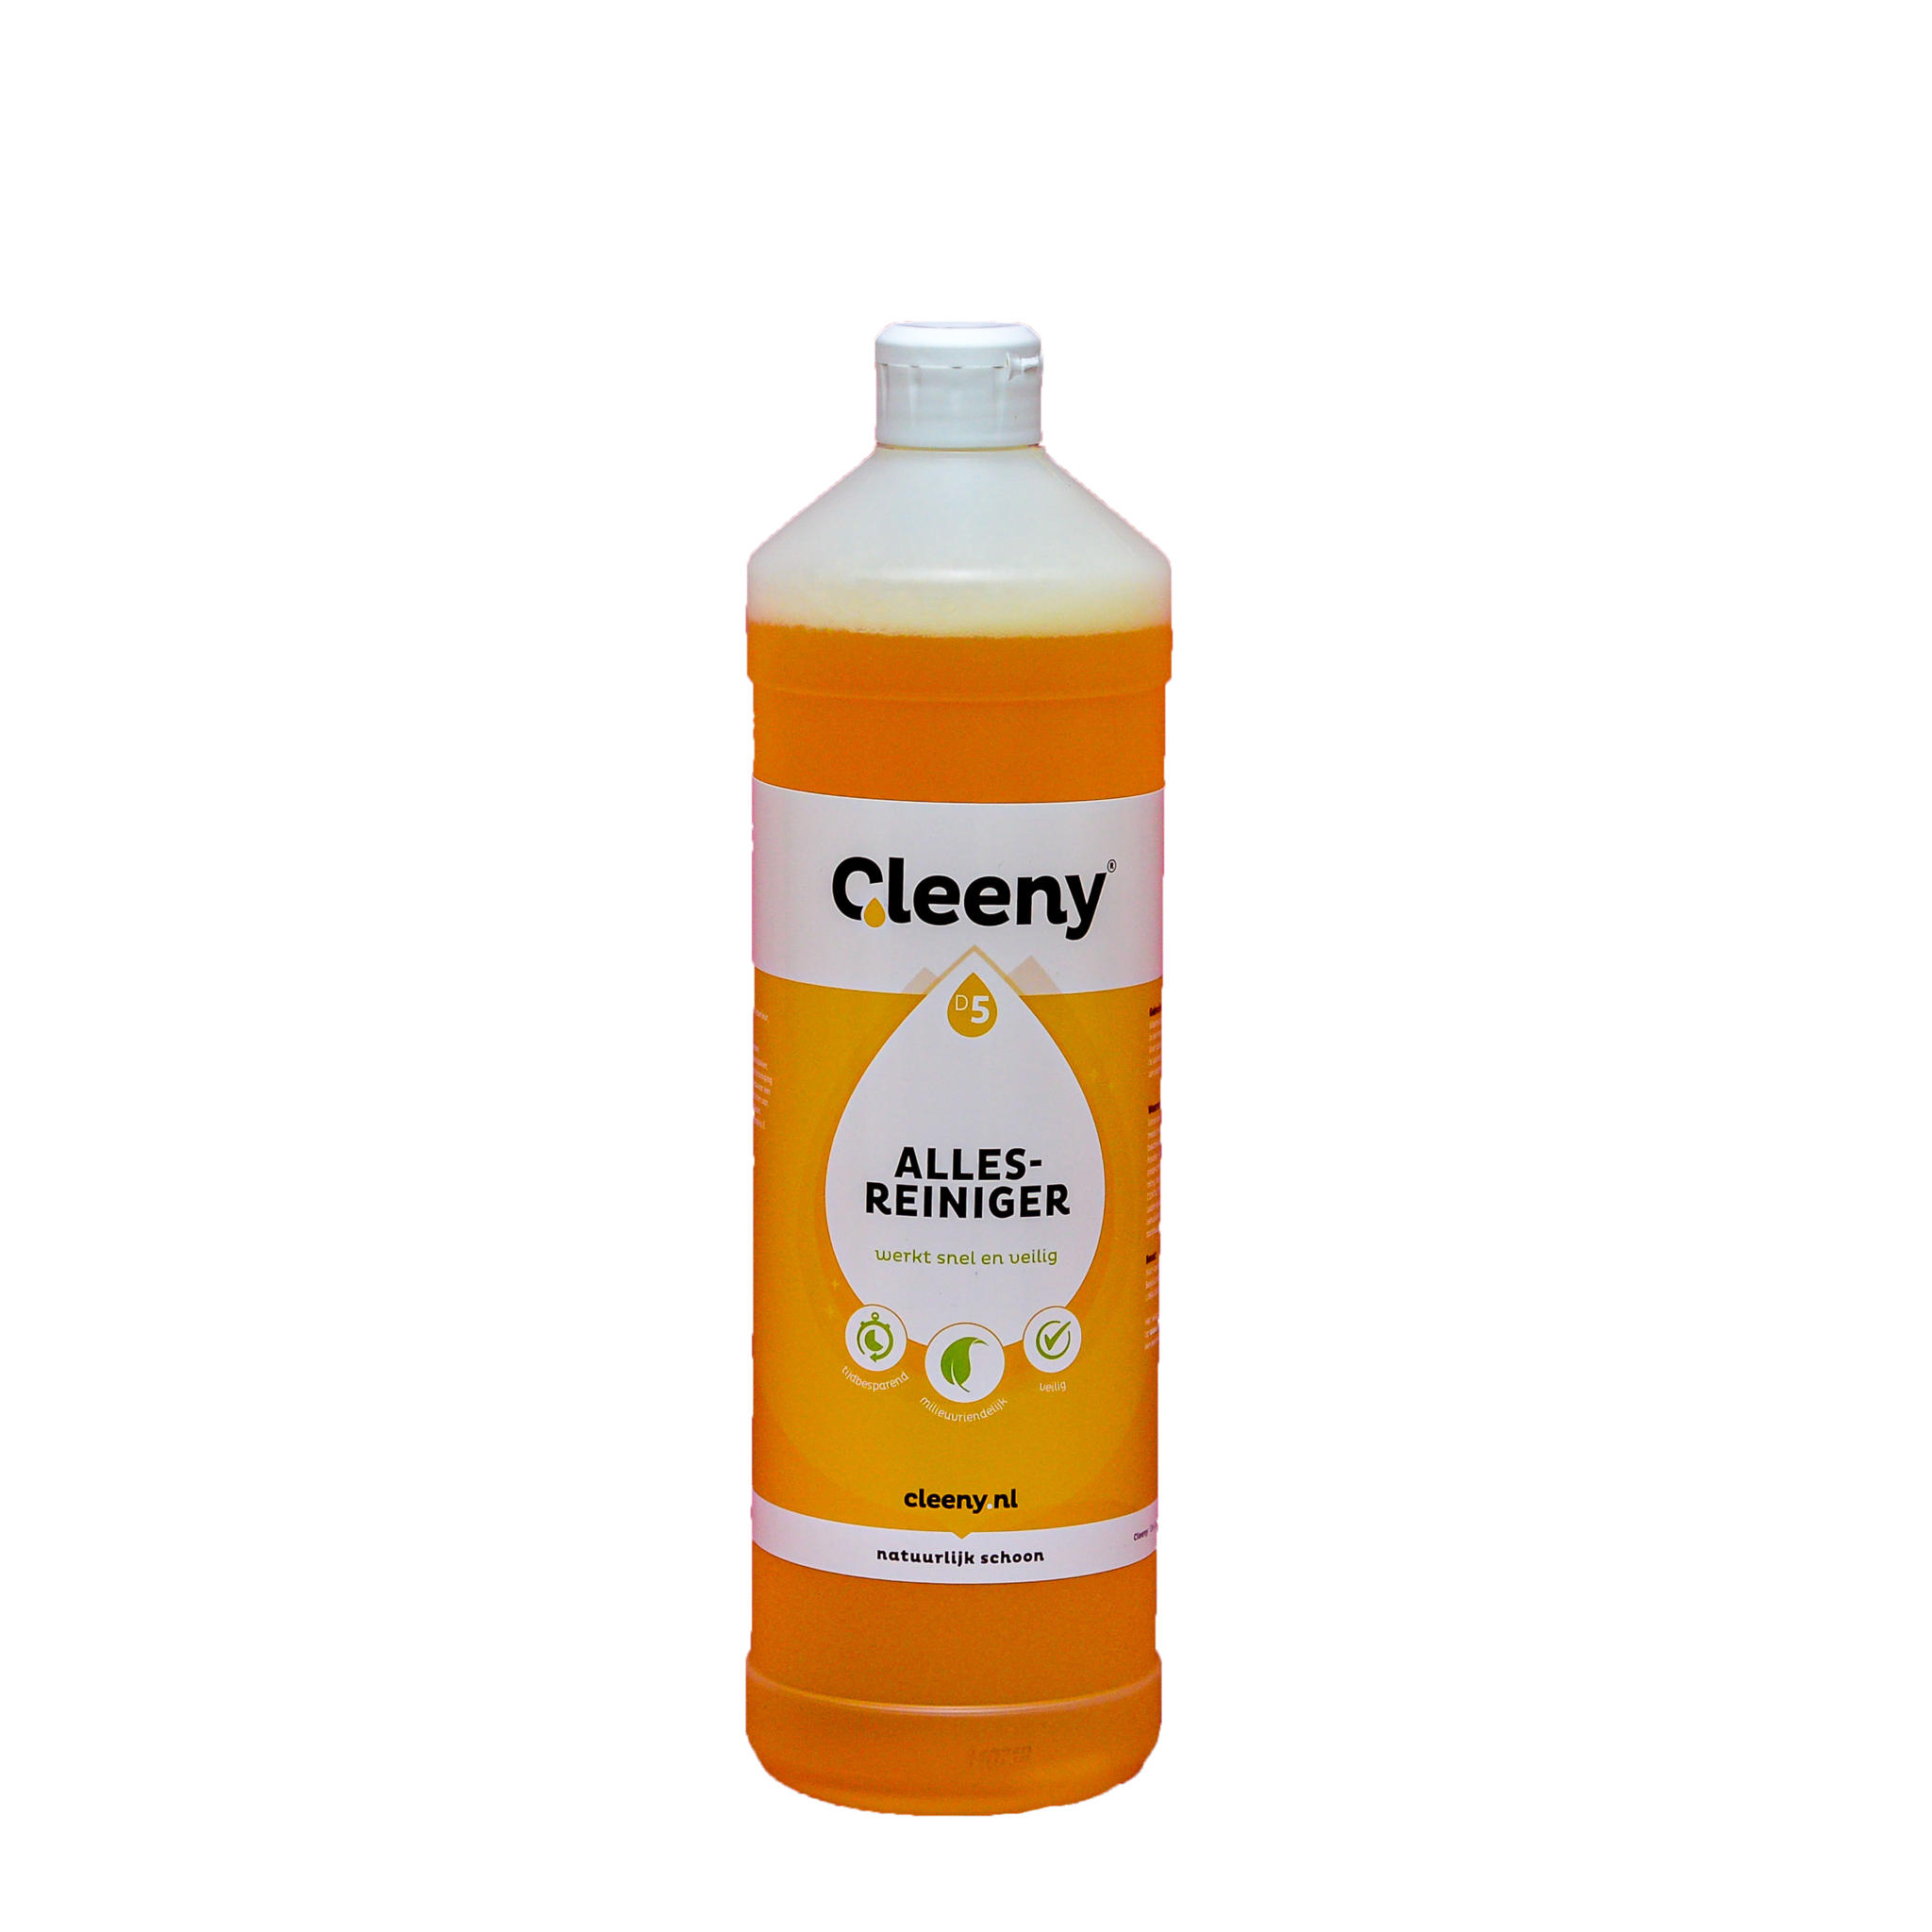 Cleeny Cleeny D5 all-purpose cleaner, 1 liter bottle of concentrate